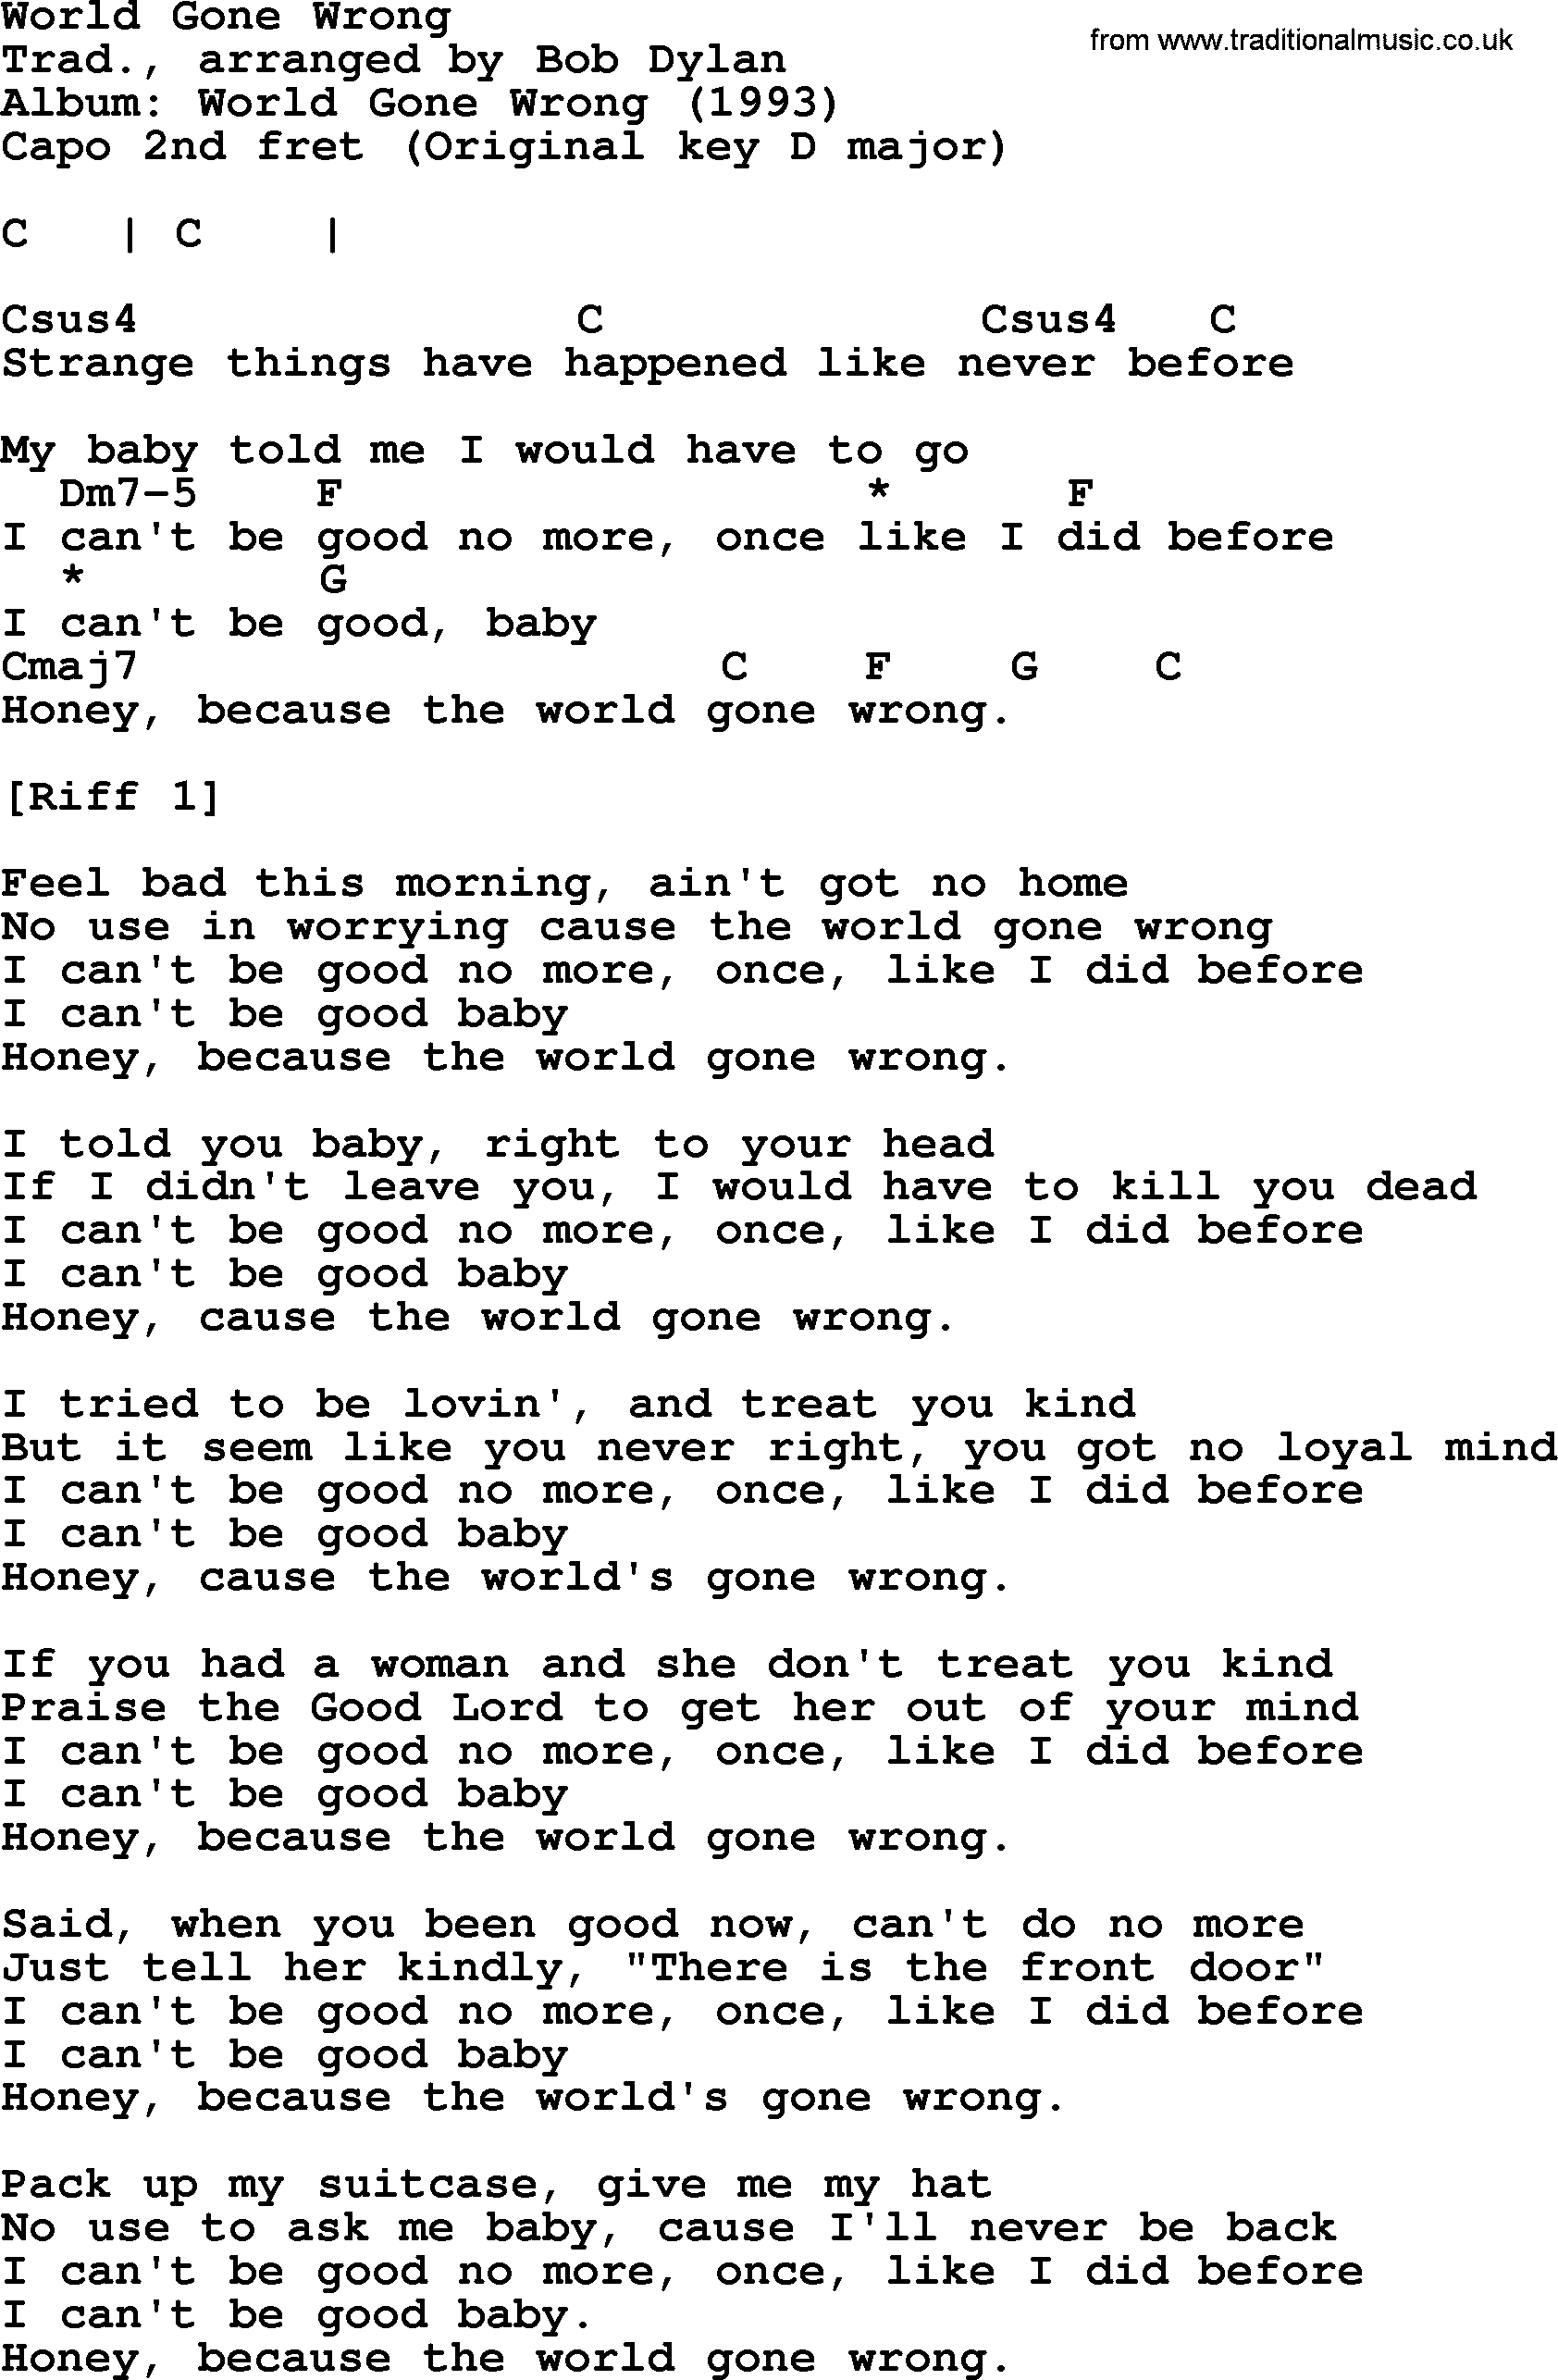 Bob Dylan song, lyrics with chords - World Gone Wrong